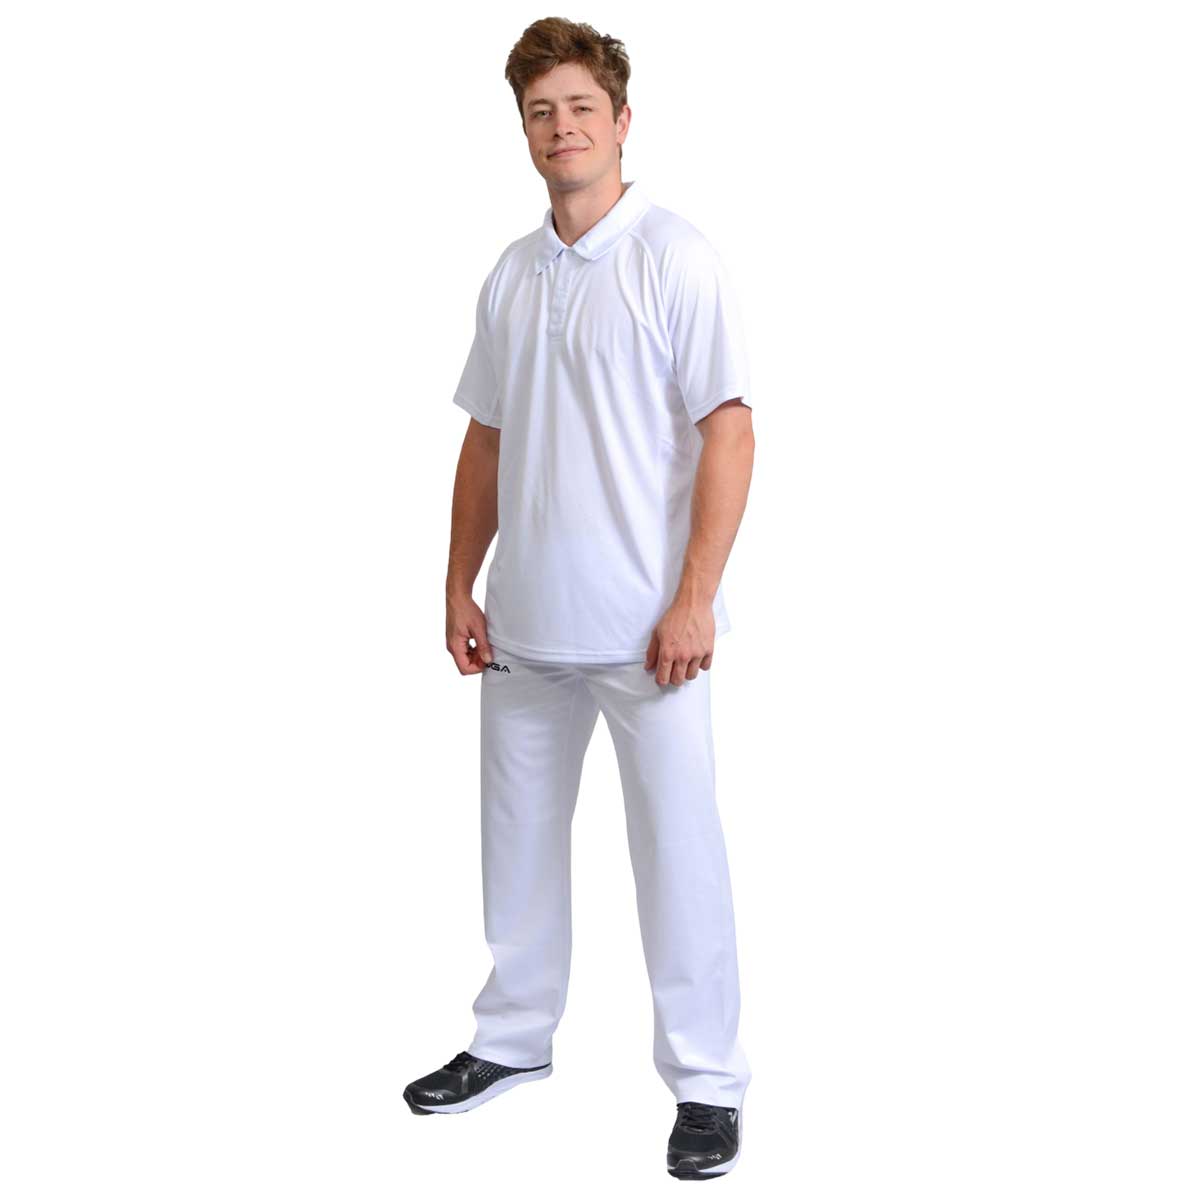 Cut and Sew Cricket Pants Manufacturers in Congo